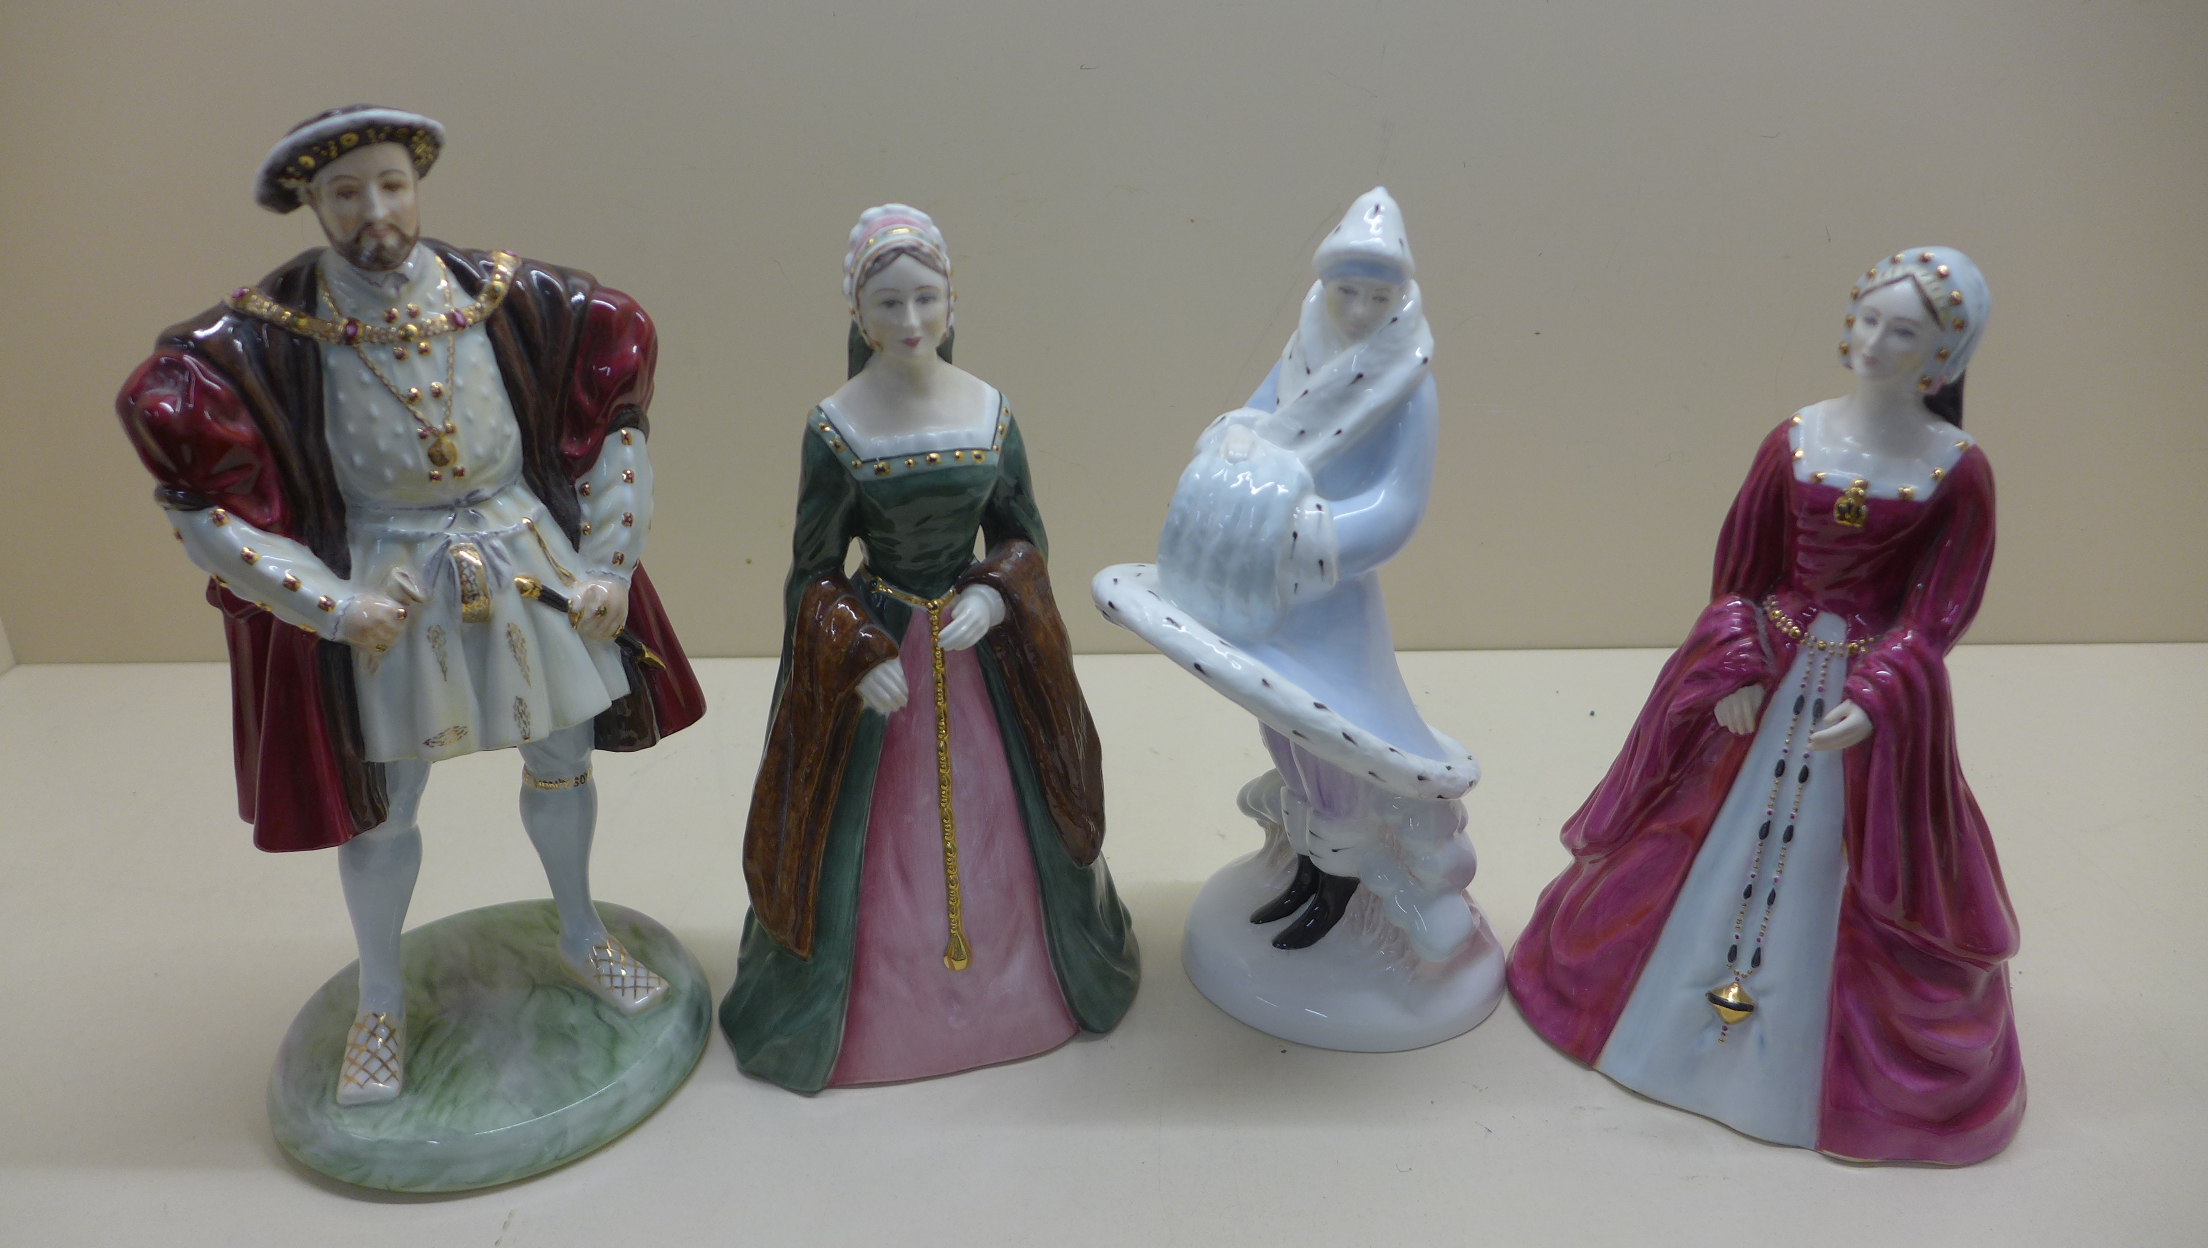 4 x coalport figures, Henry VIII, Jane Seymour, Catherine Parr and Miss 1920, all good - Image 2 of 2